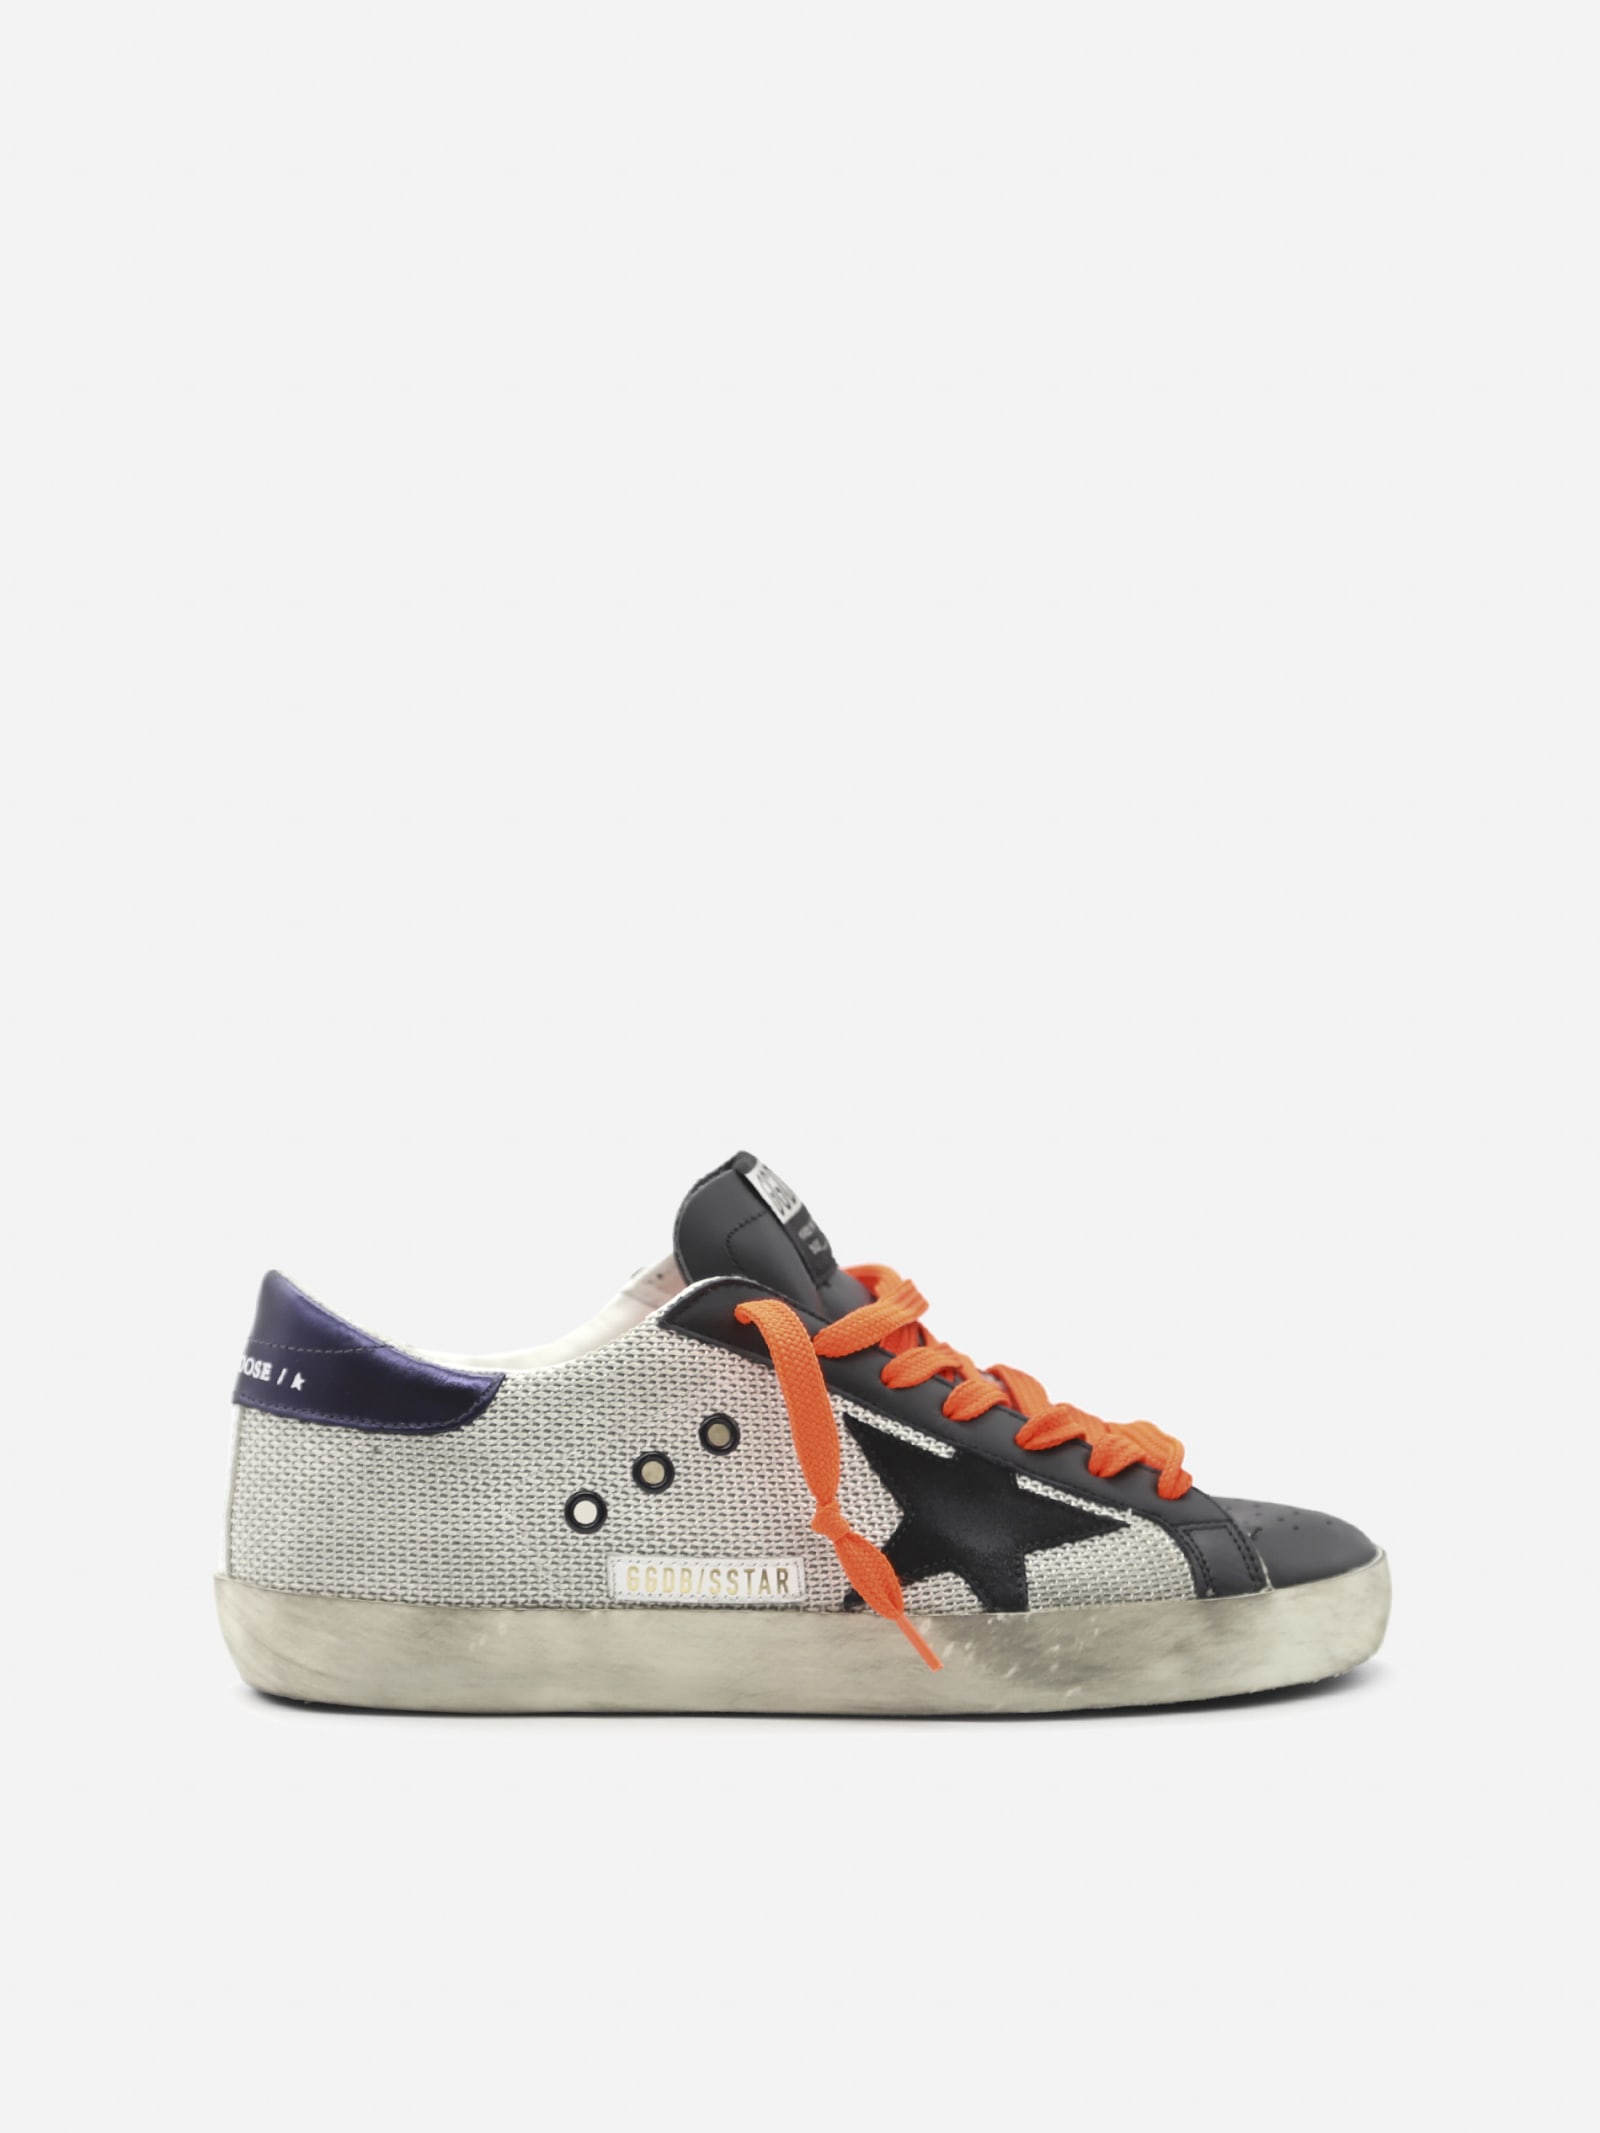 Golden Goose Superstar Sneakers In Leather With Mesh Inserts And Contrasting Heel Tab